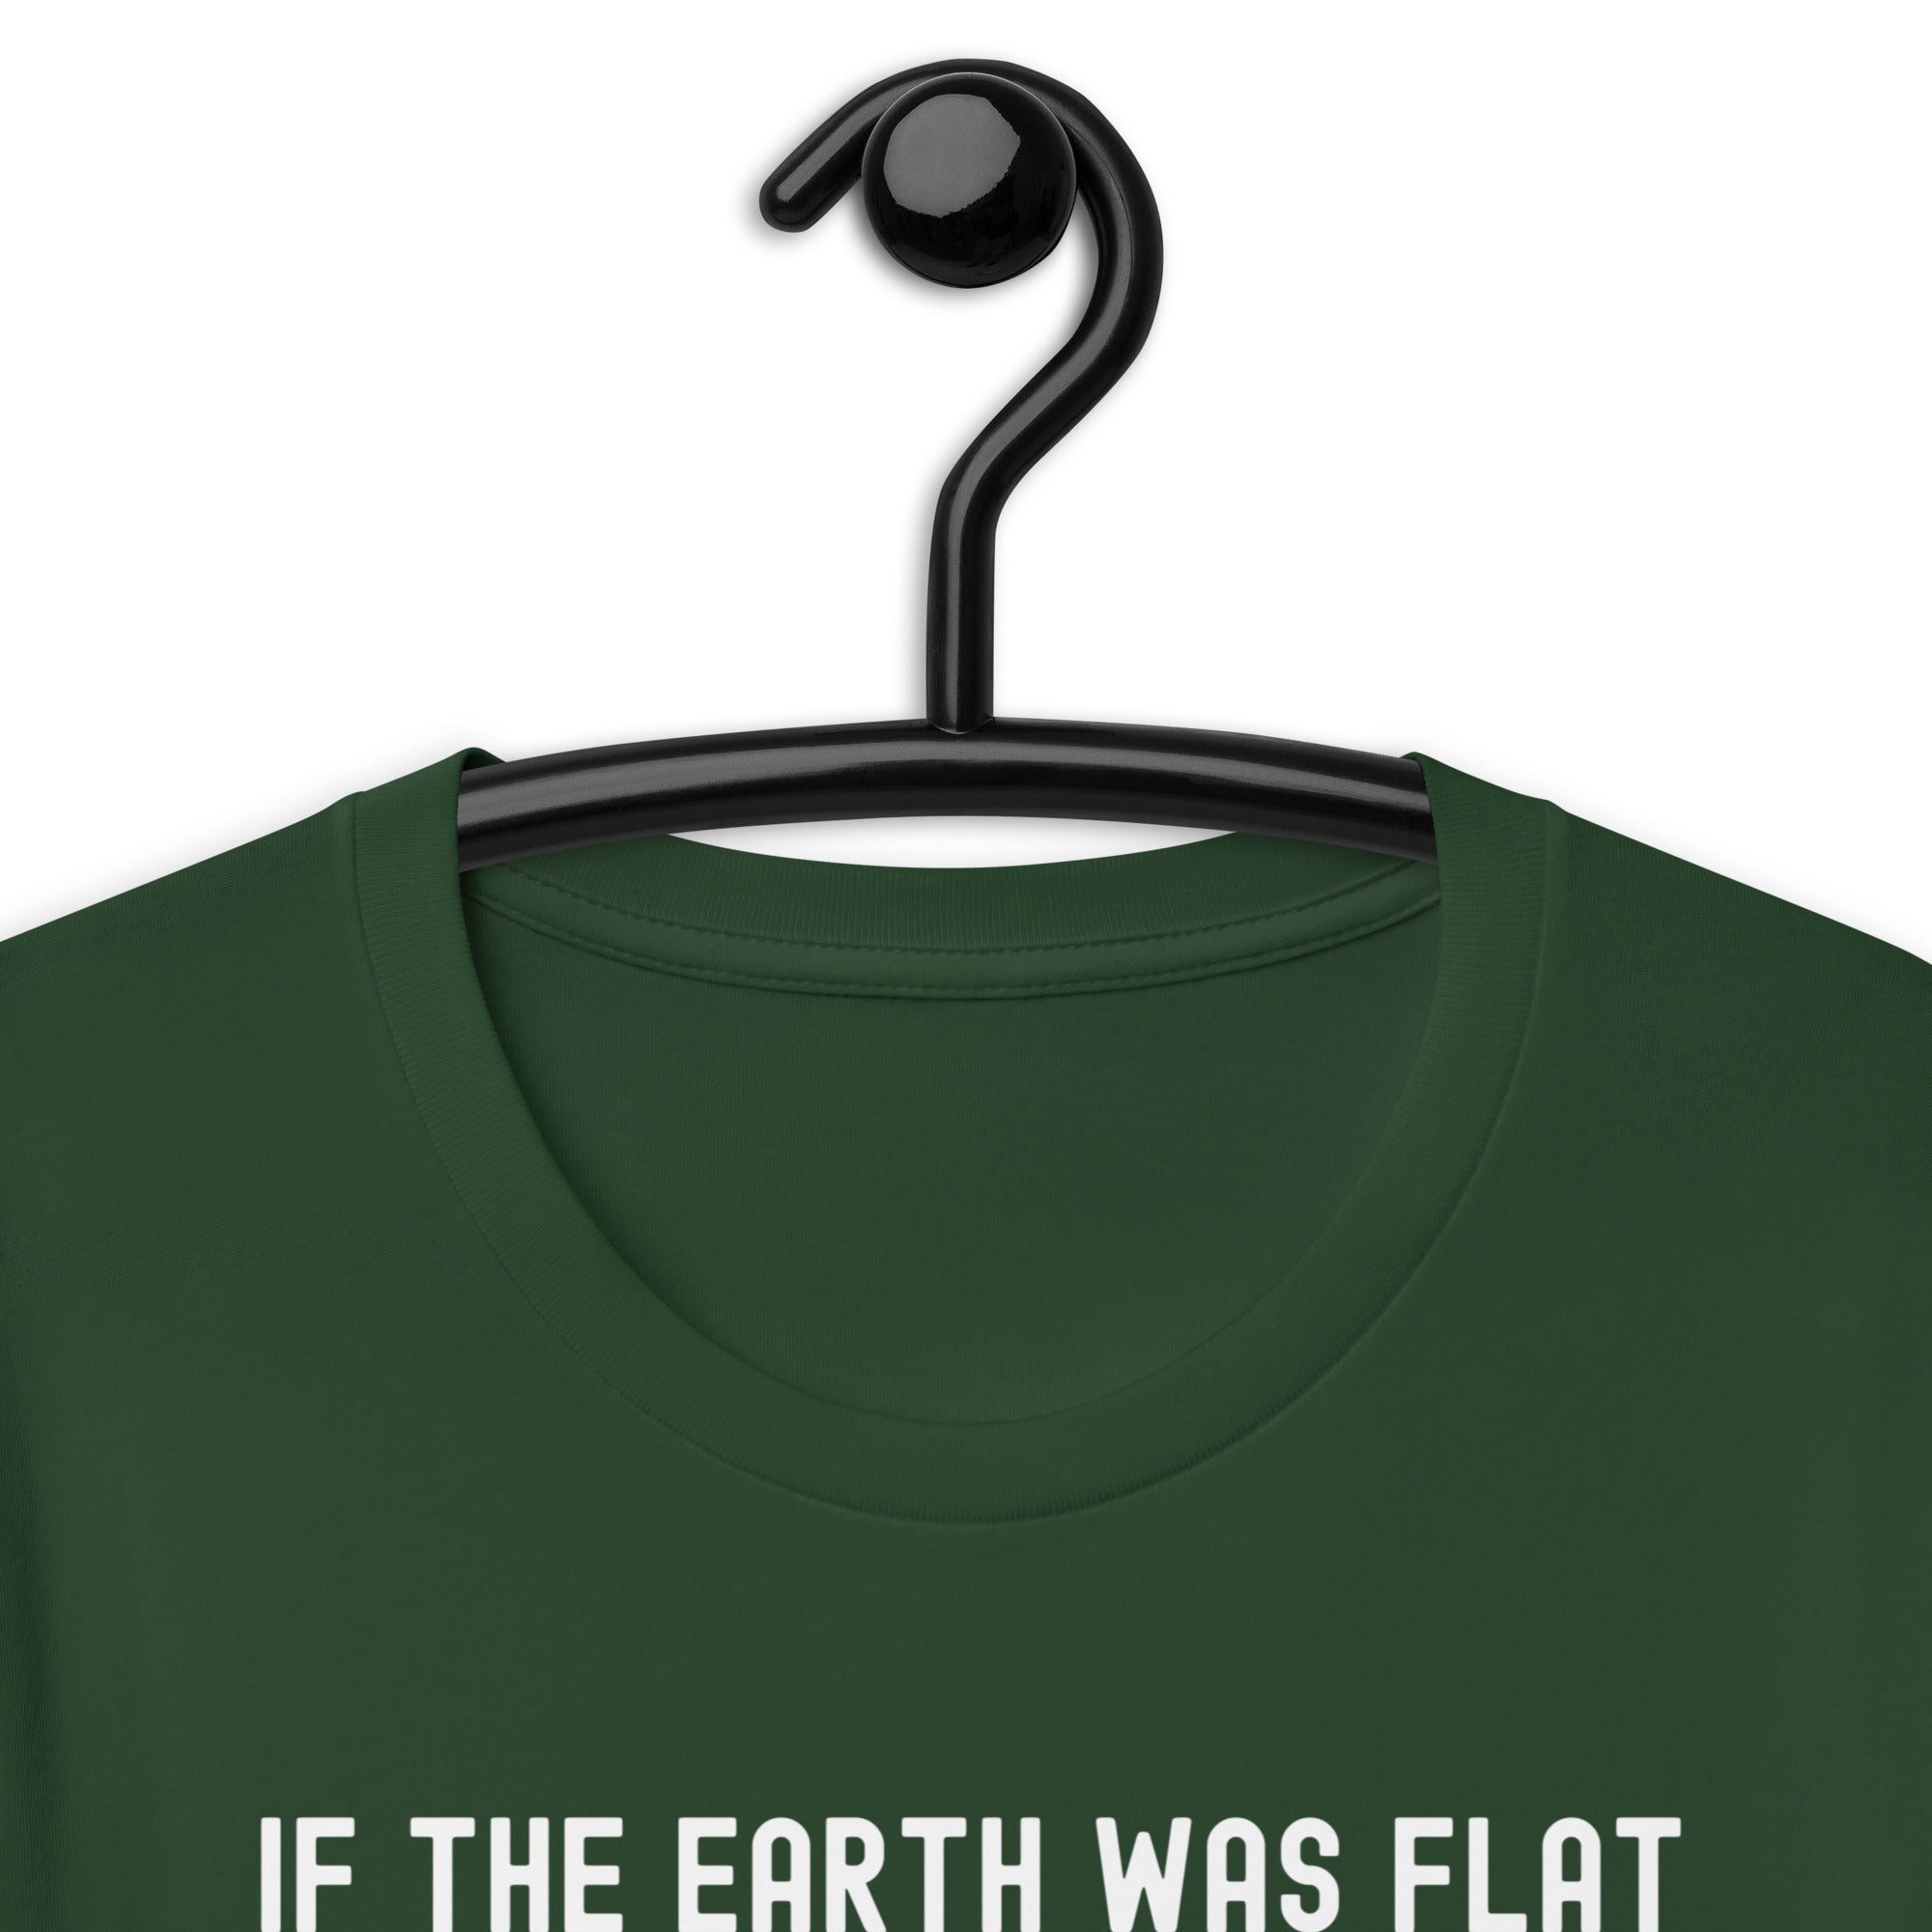 Unisex t-shirt | If the earth was flat, cats would push everything off the edge